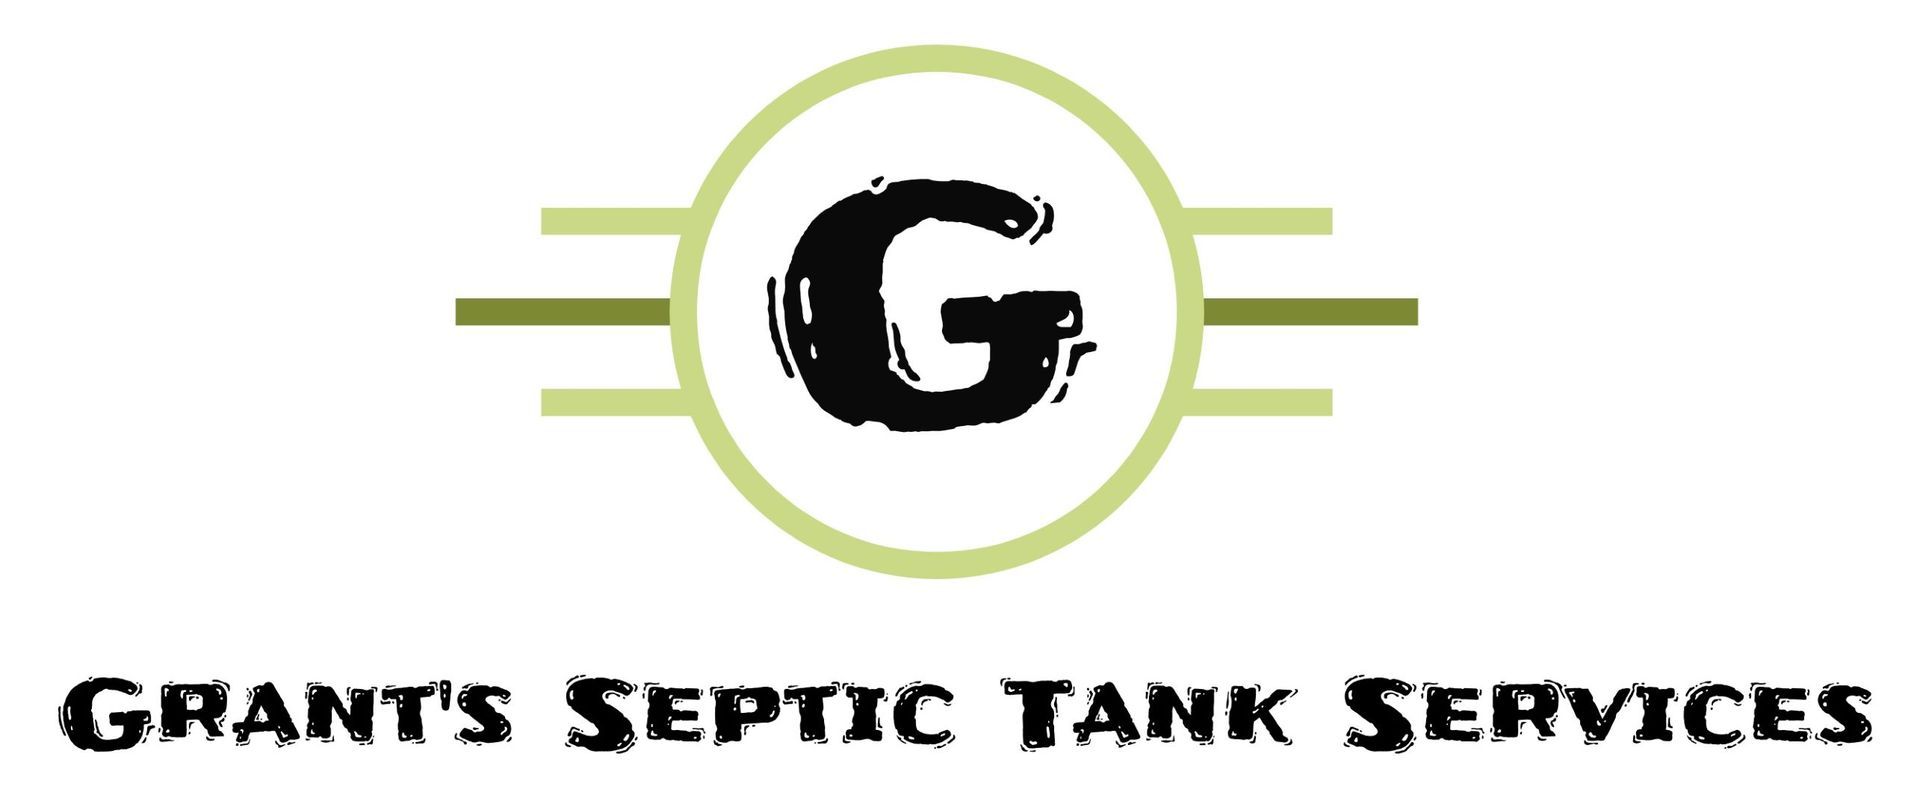 Grant's septic tank services logo